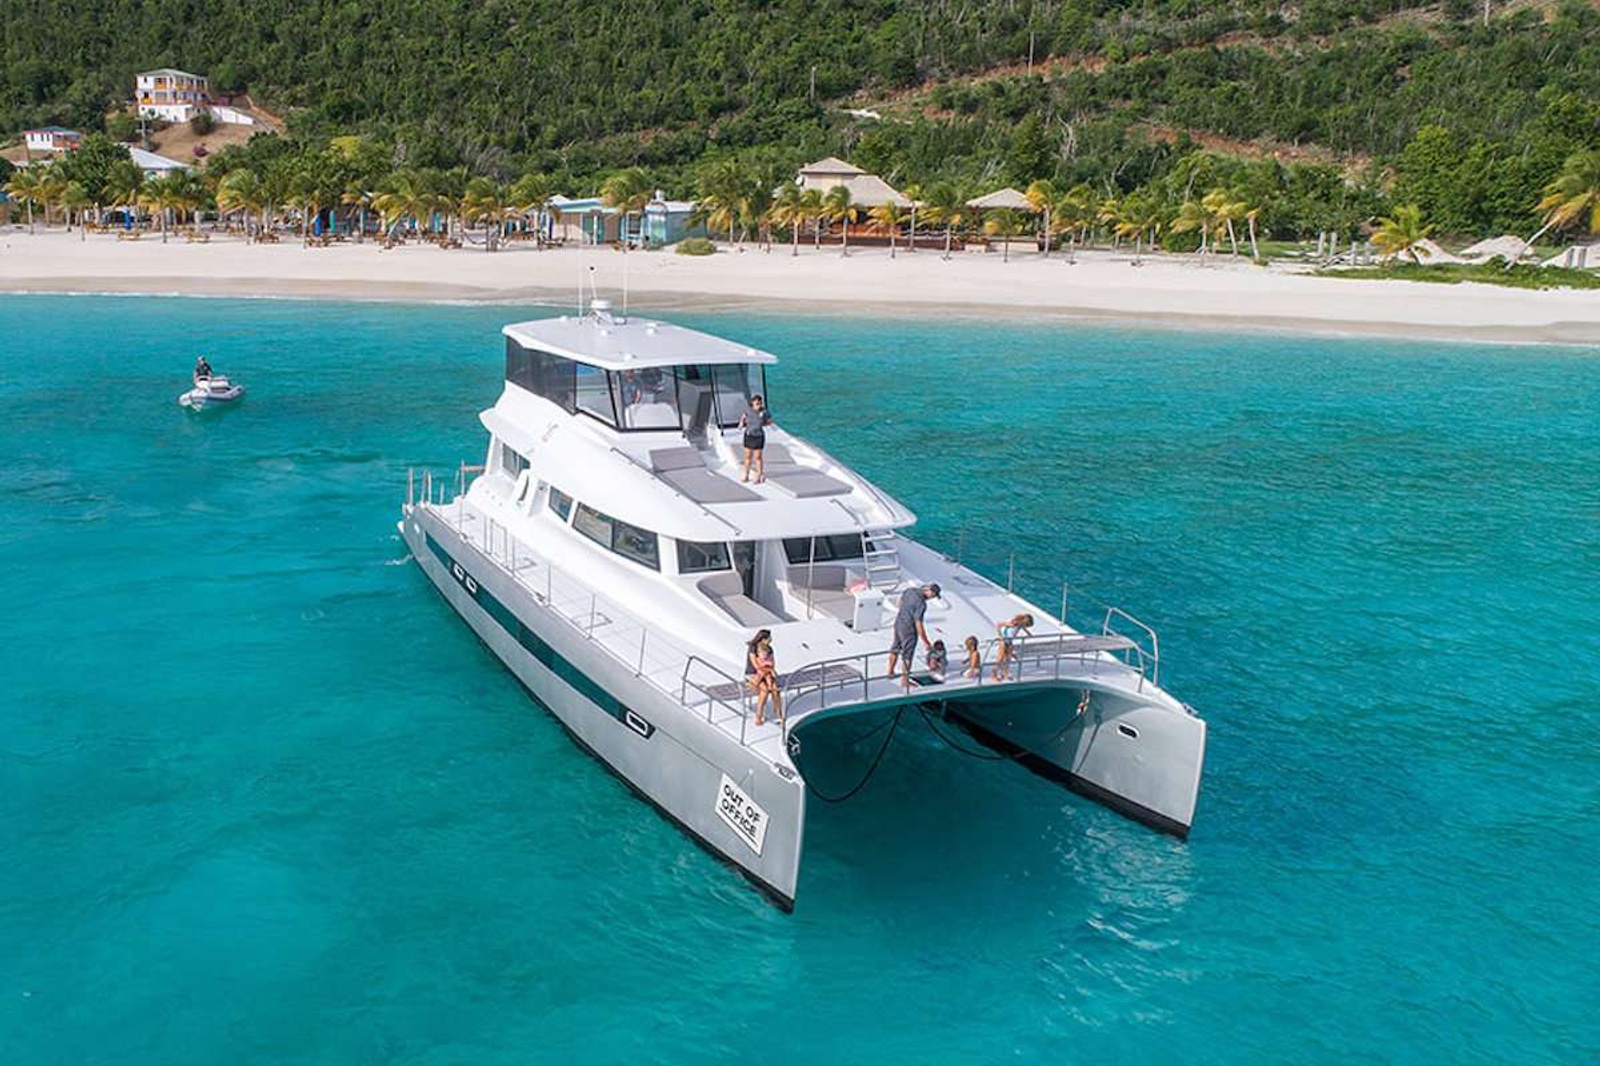 Designed specifically for charter service, Out of Office has 6 equal en-suite staterooms, separate crews’ quarters and expansive entertainment areas on the main deck and flybridge. Launched in 2016, the vessel is the largest catamaran to come out of the VOYAGE yachts Cape Town factory and was built utilizing advanced construction and design techniques. Performance underway is exceedingly comfortable and fuel efficient for a vessel of this size and, when at anchor or docked, the layout offers a virtual floating villa experience for its guests. A partial refit was completed in 2019 during which an enlarged flybridge hard top was installed and the hulls were painted in a metallic grey finish. 